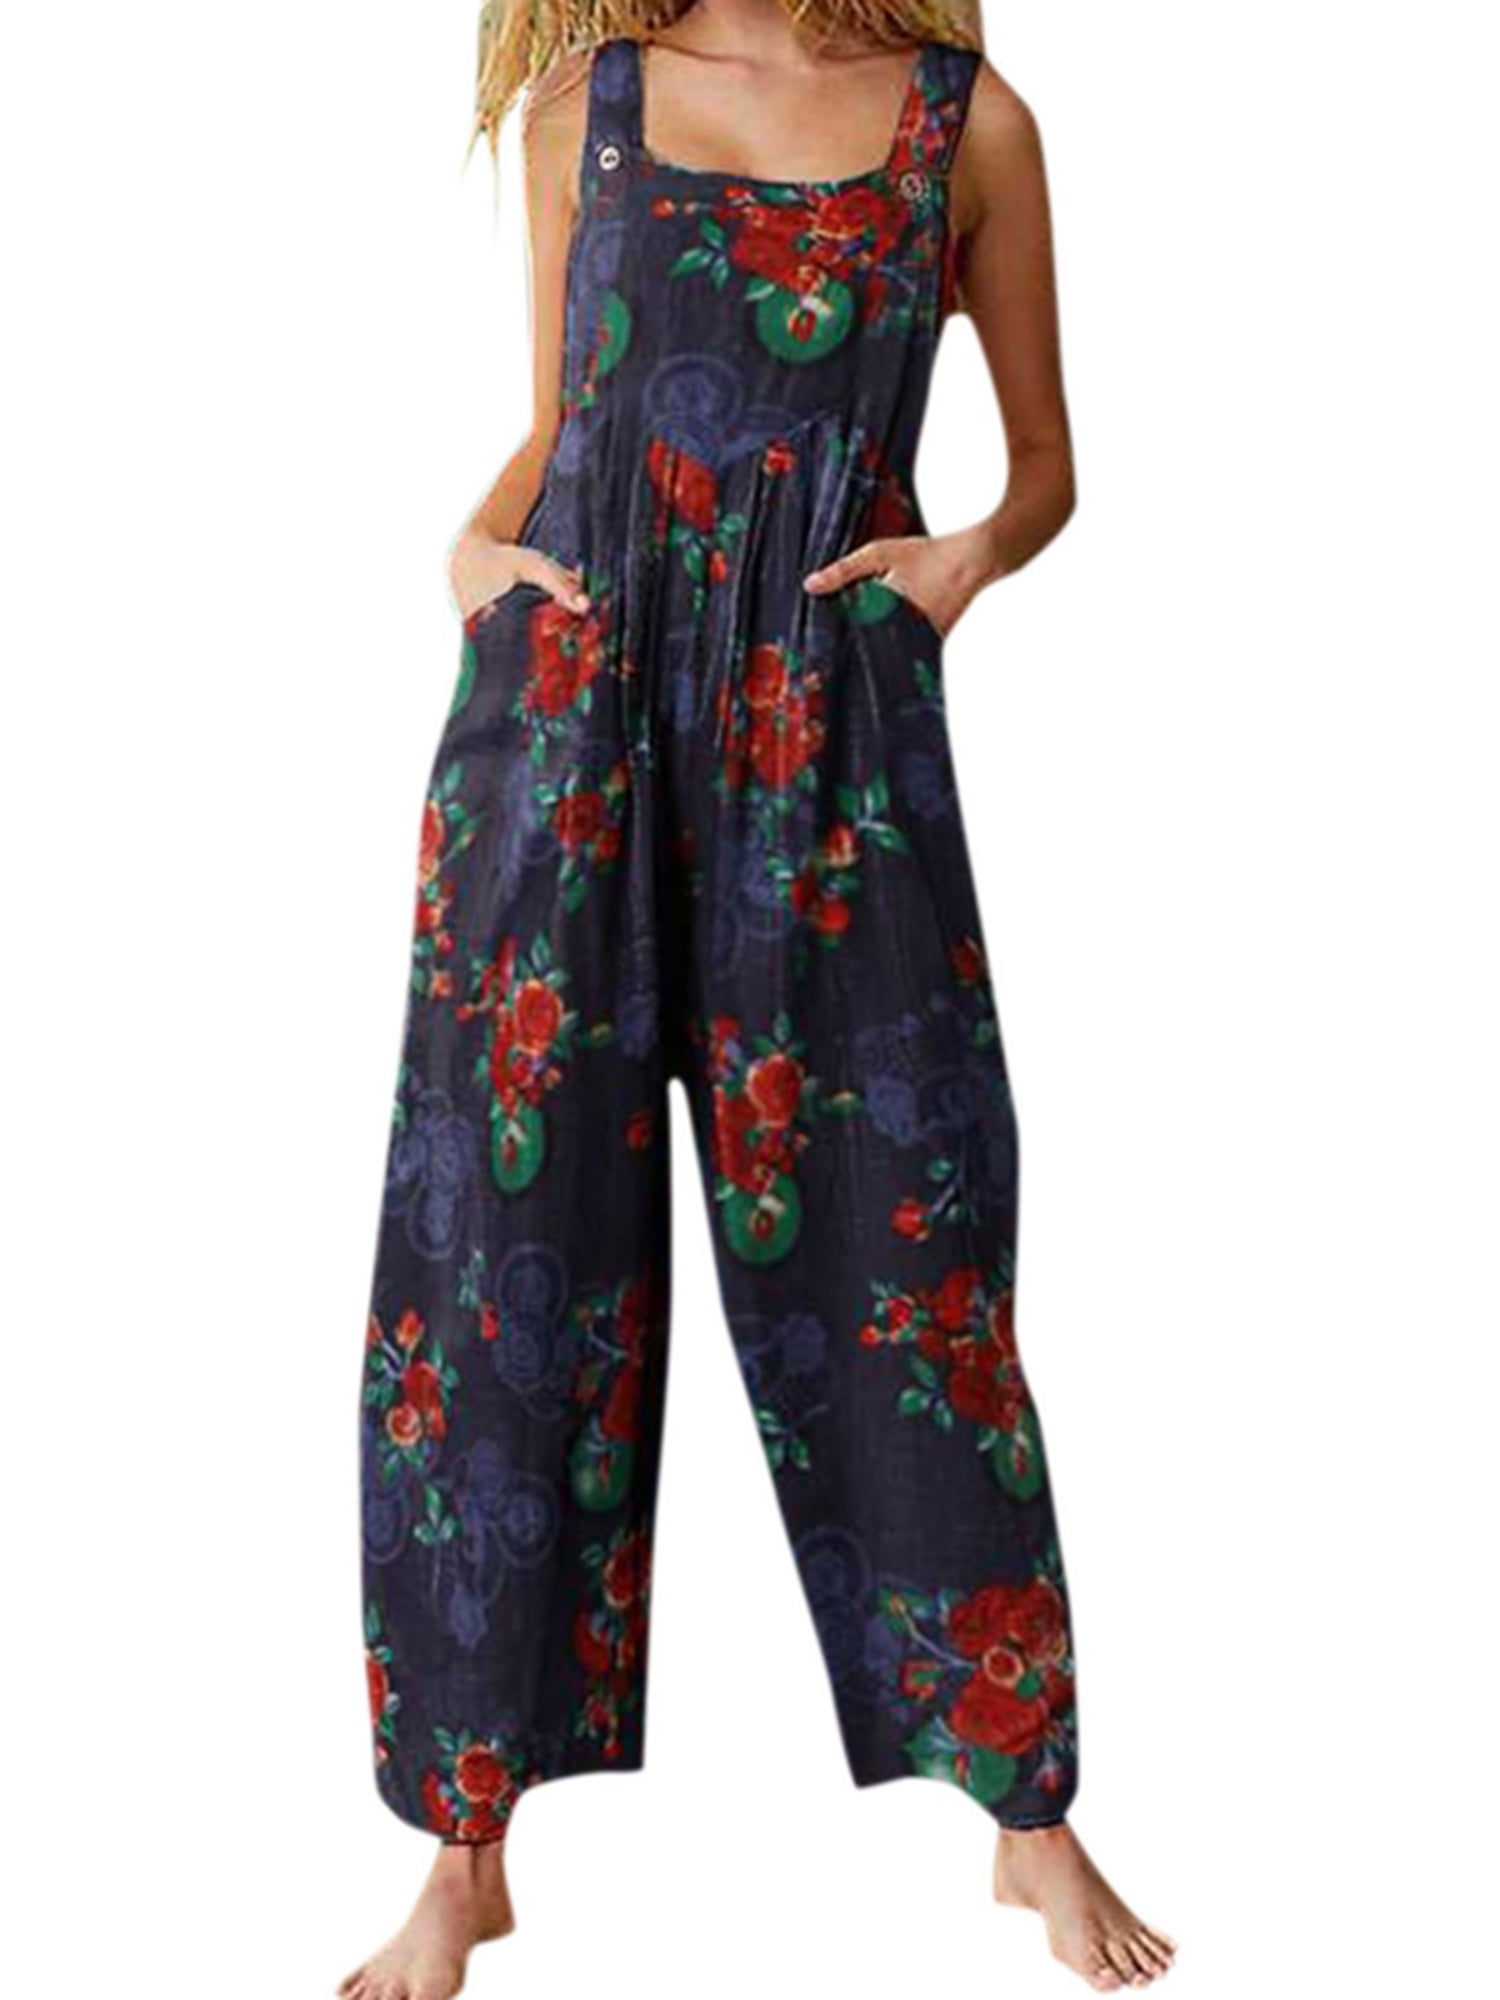 Wadonerful Boho Jumpsuit for Women Floral Print Tie Shoudler Plus Size Overalls with Pockets Wide Leg Rompers Beach Seaside 